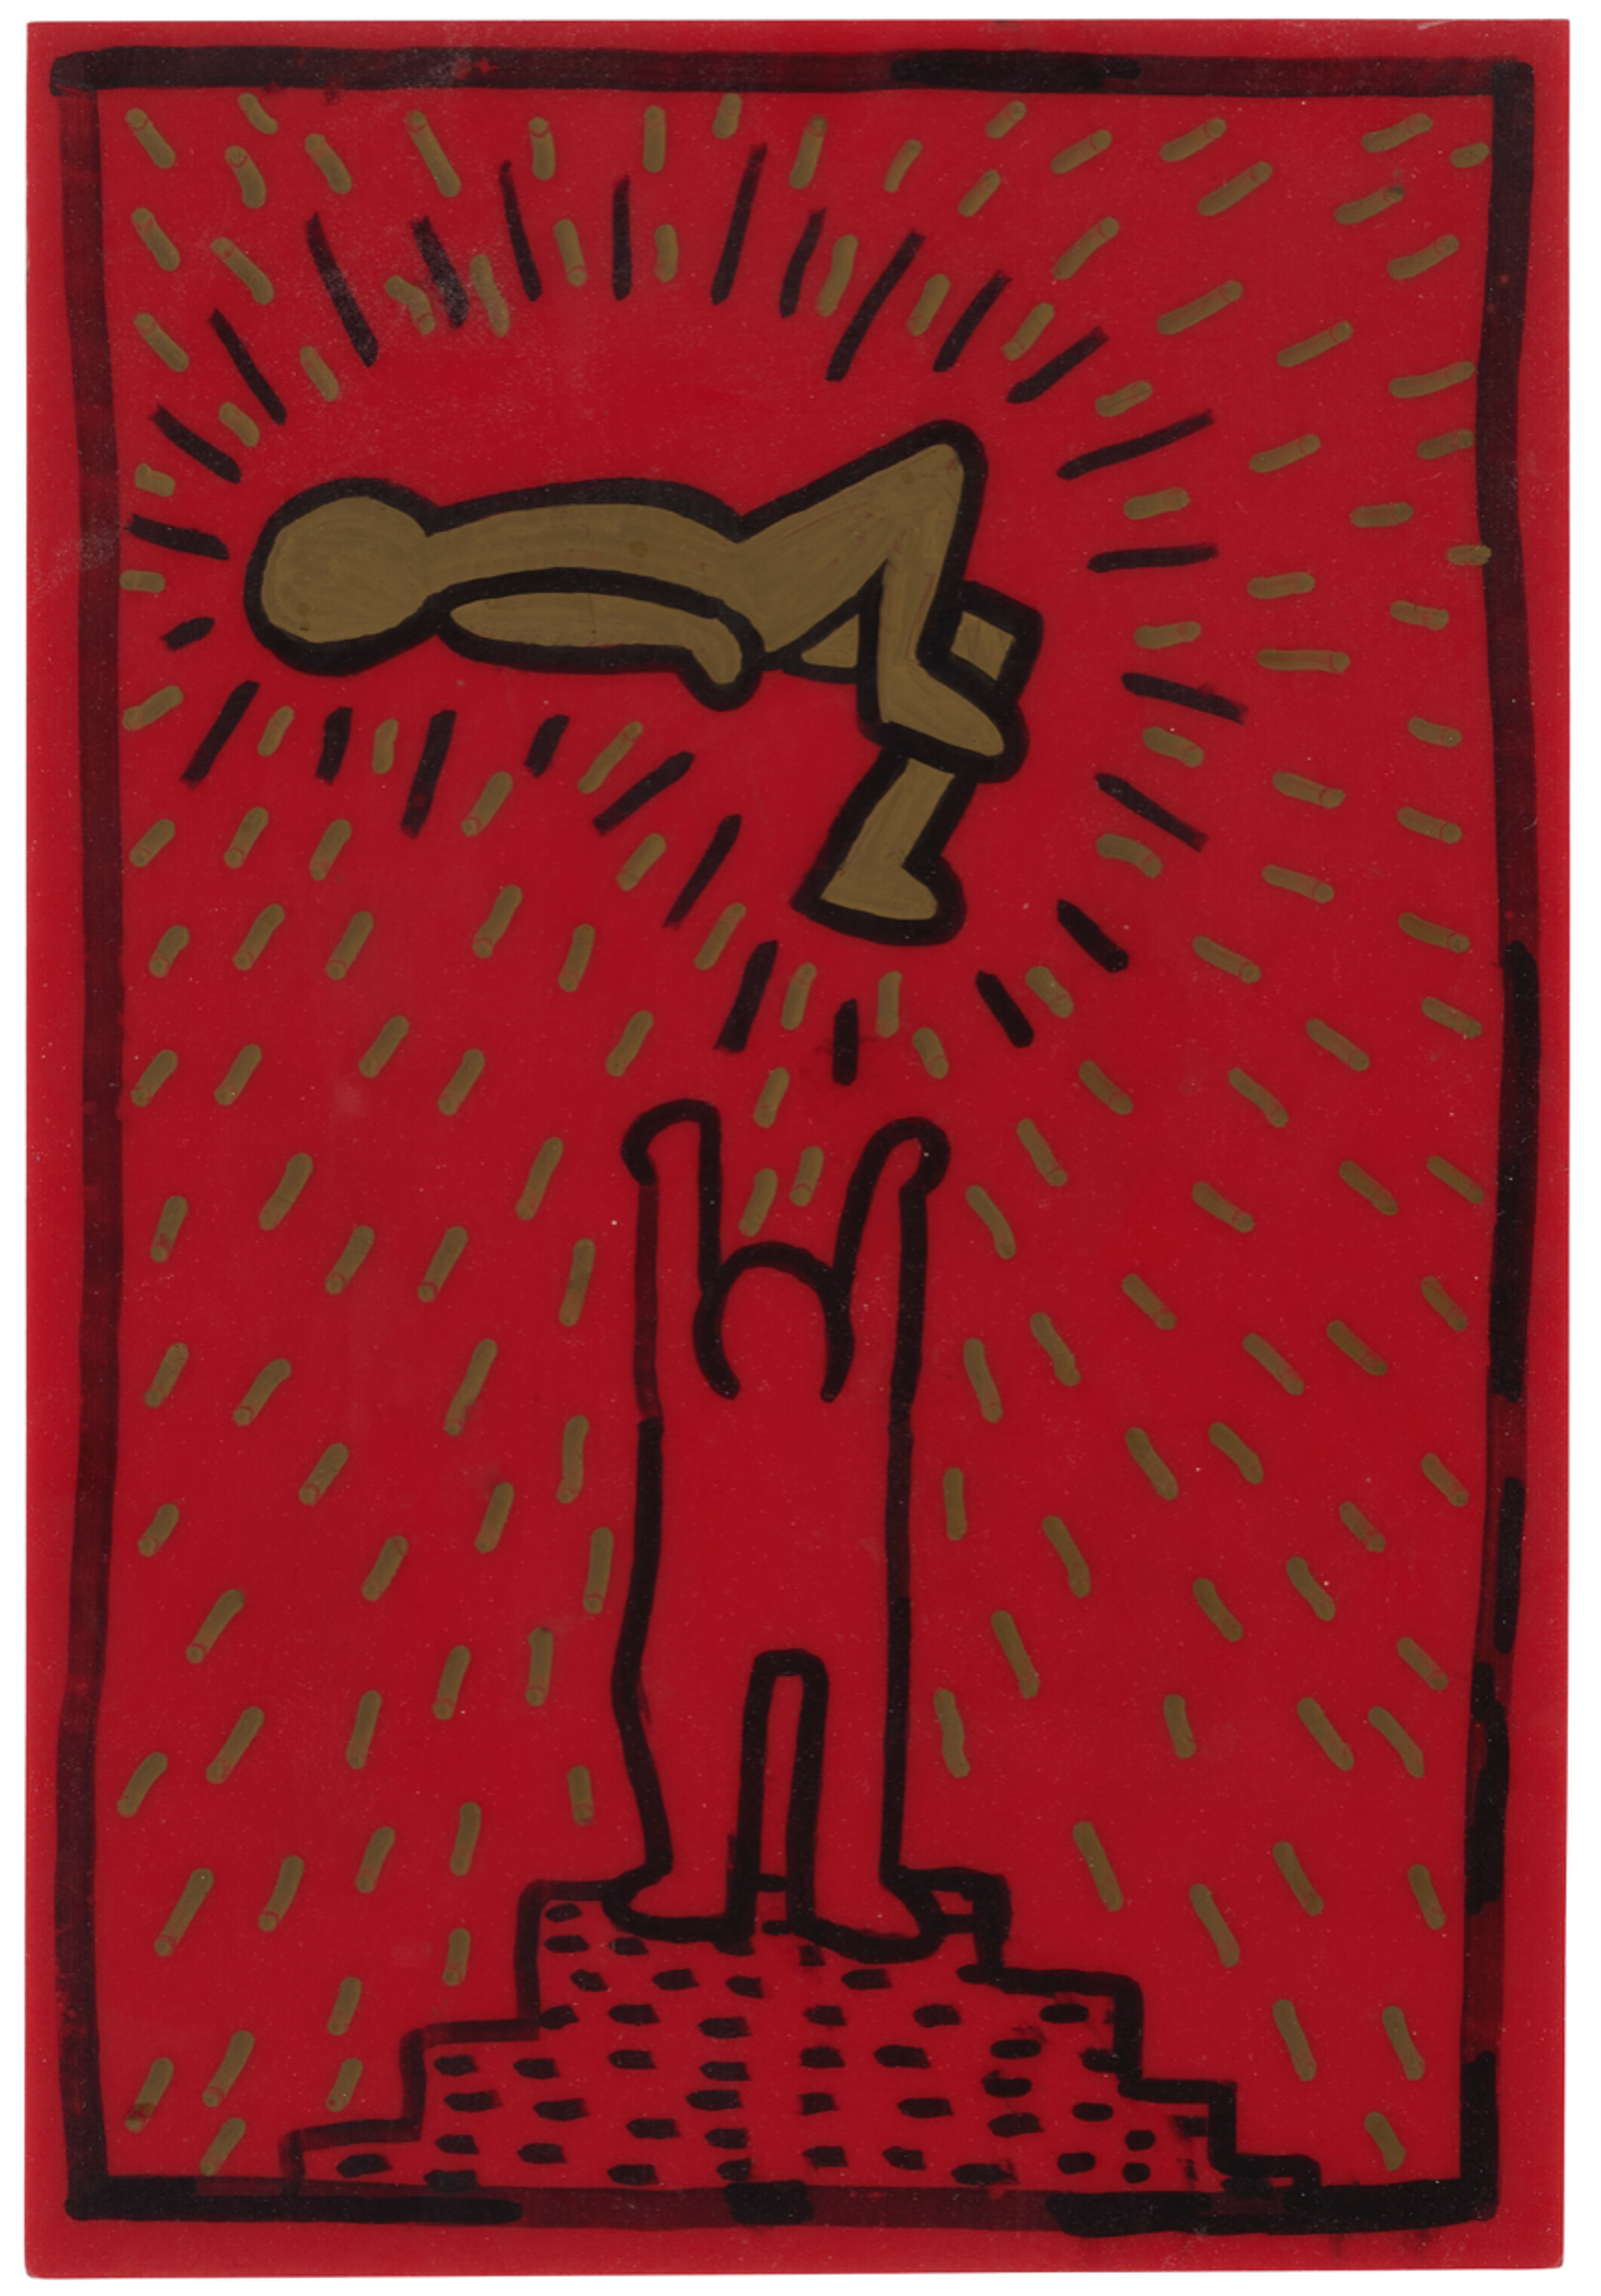 Image © Christie's / Untitled © Keith Haring 1981